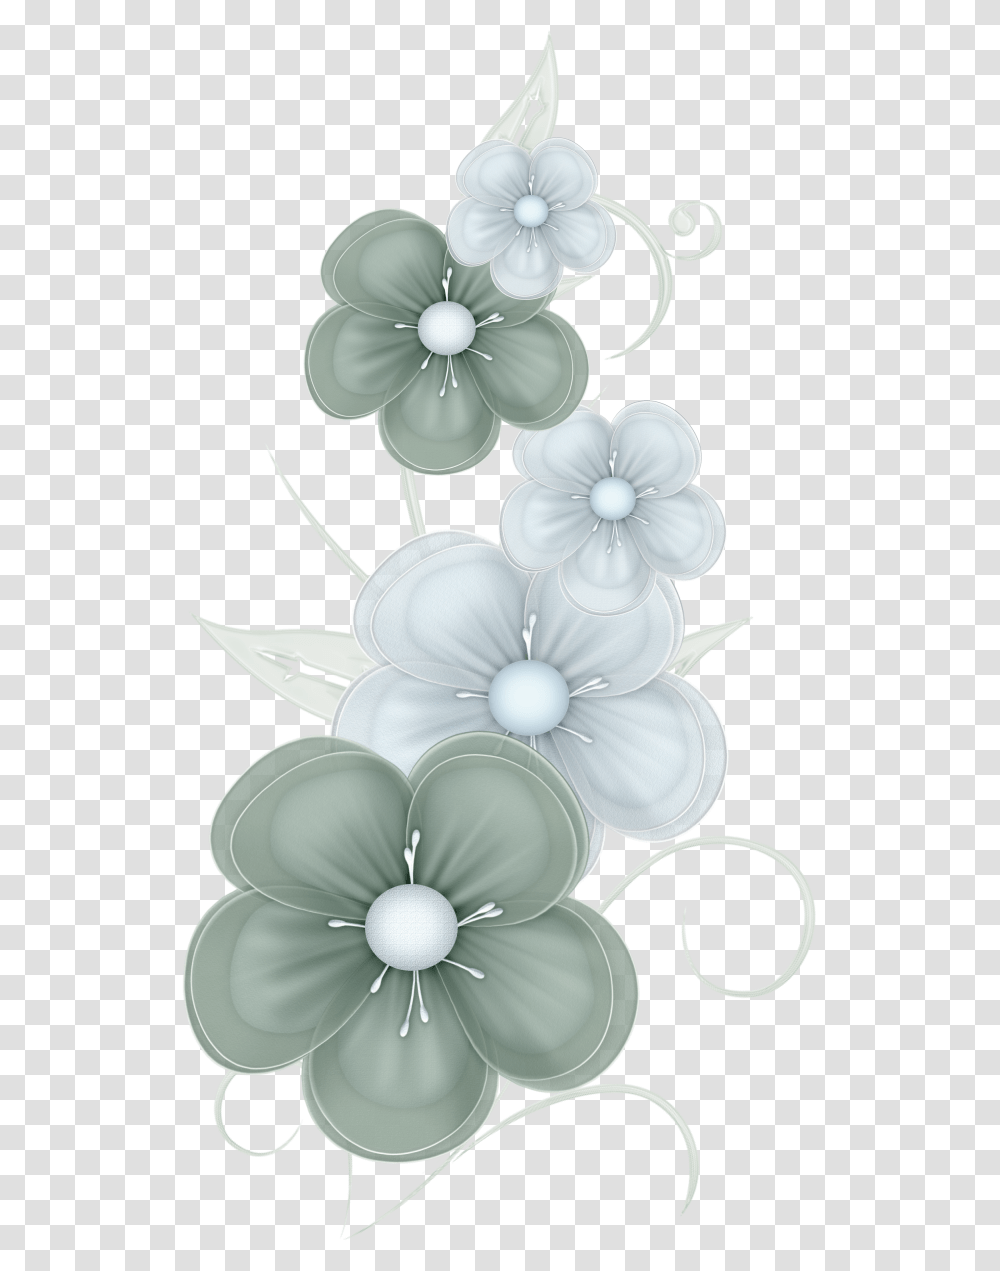 Green Flowers By Pvs By Pixievamp Stock Green Flowers, Accessories, Accessory, Jewelry Transparent Png